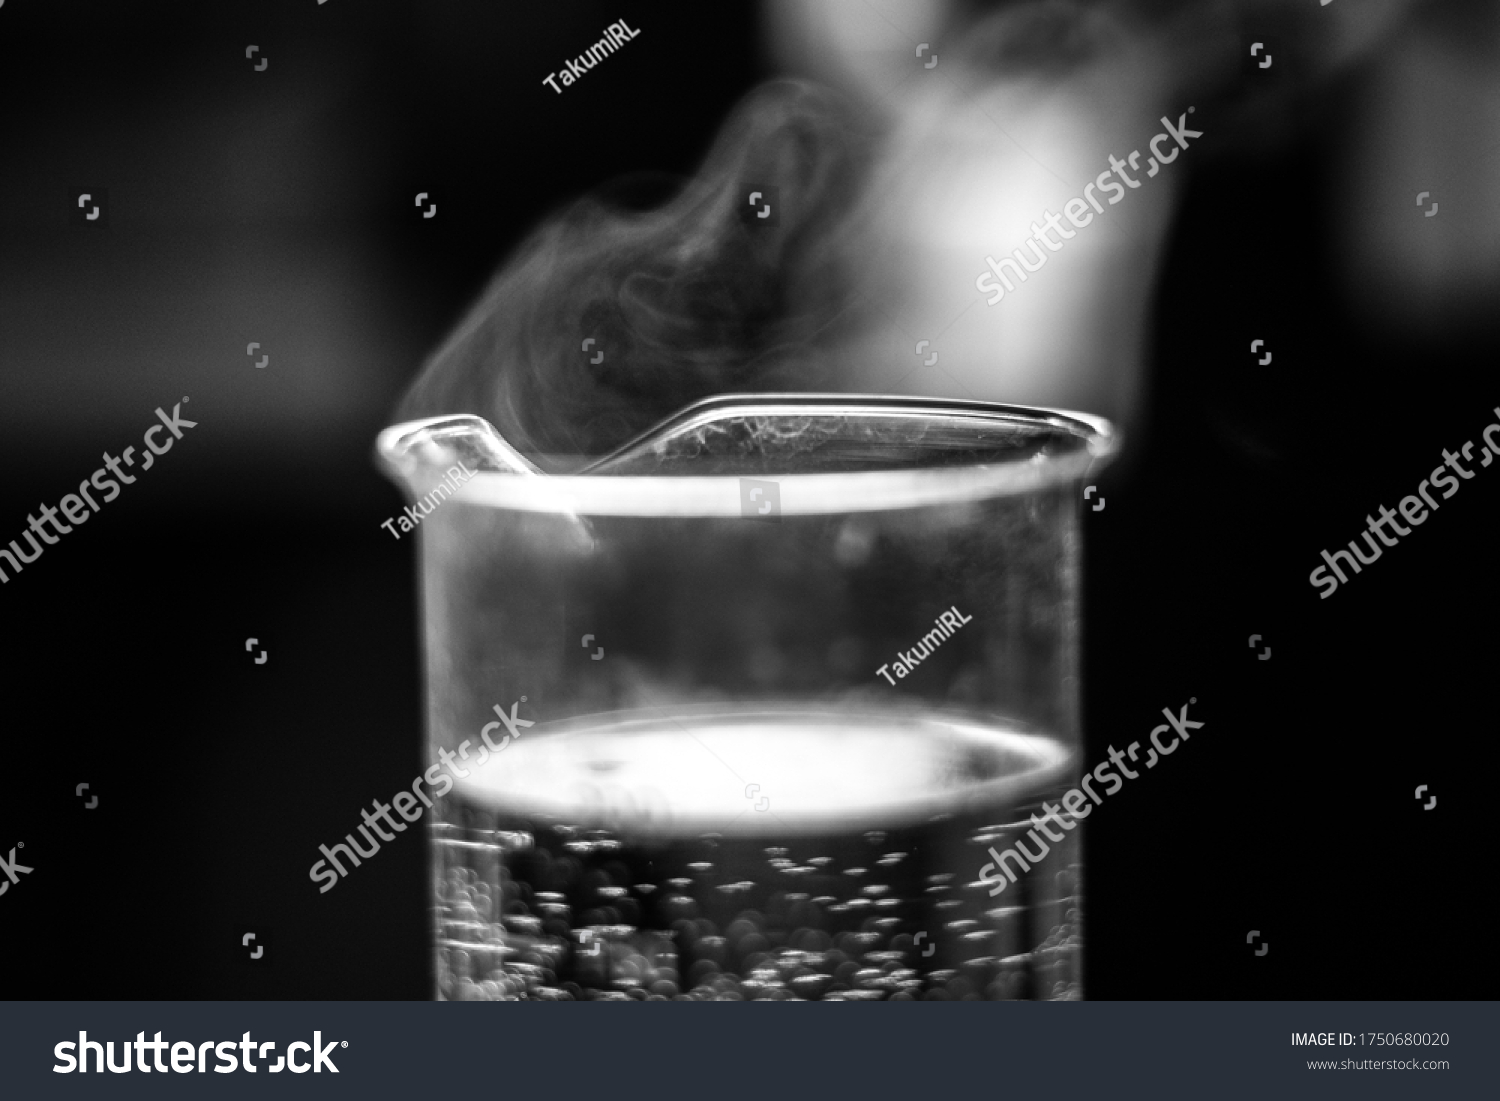 Water evaporation experiment on glass beaker black and white #1750680020